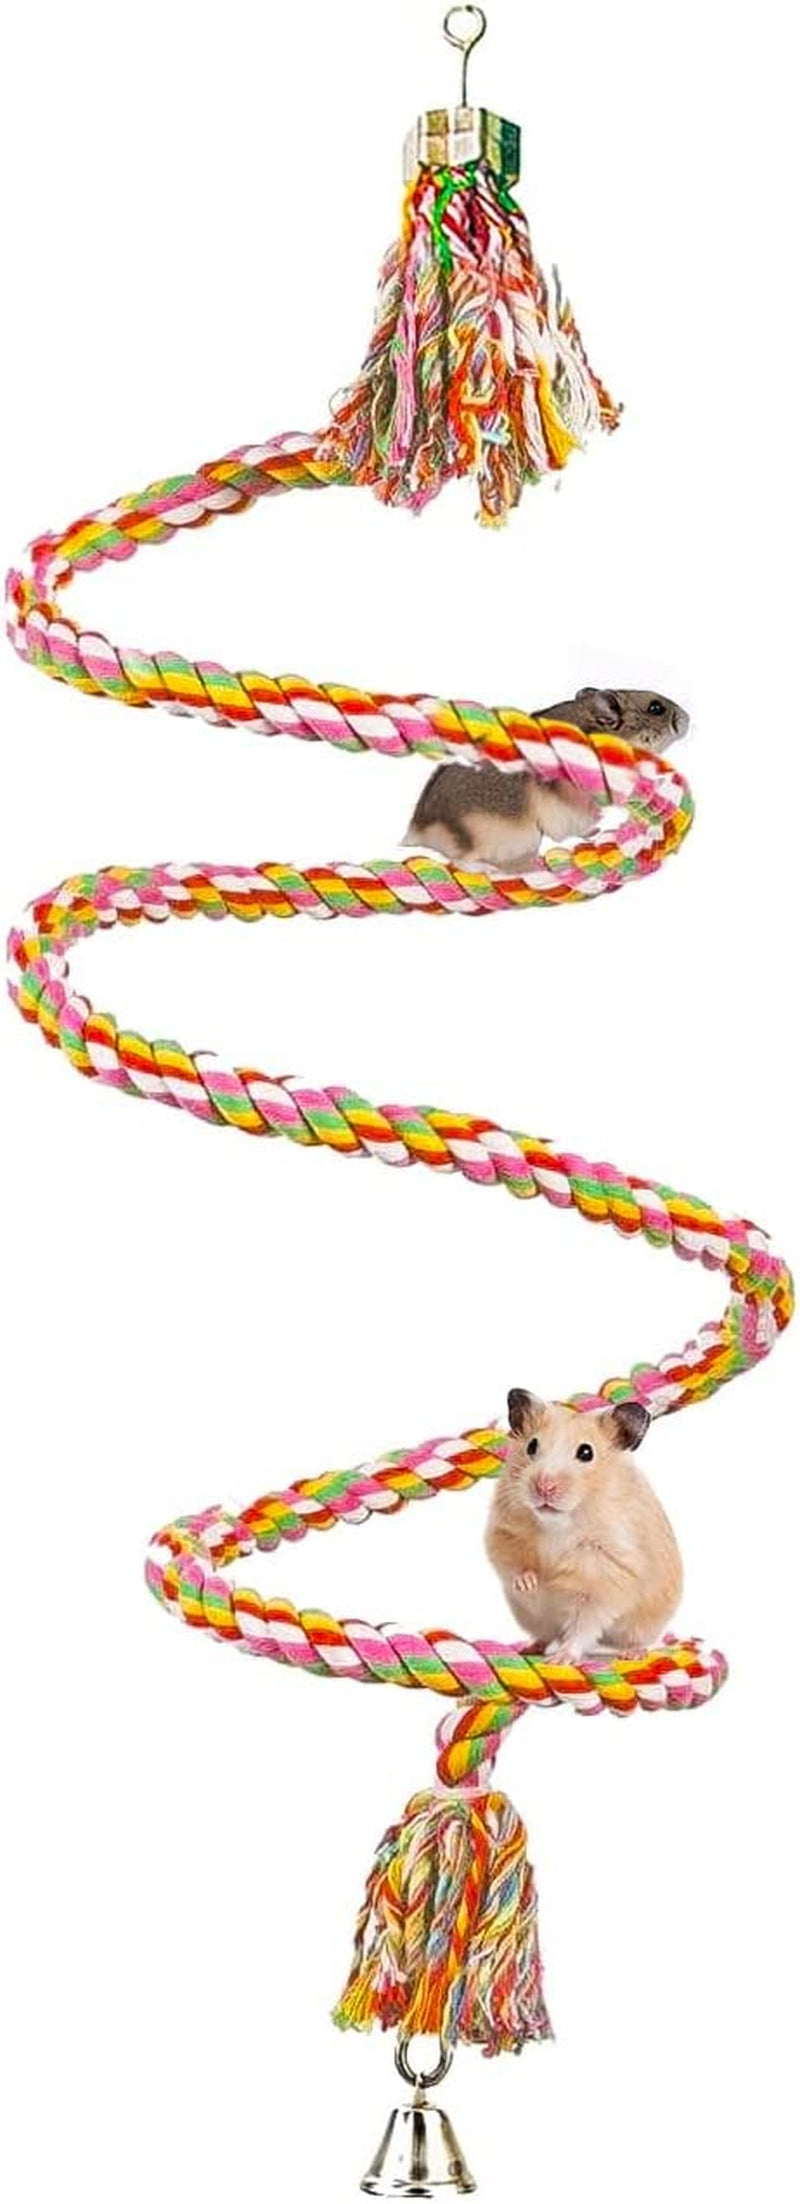 Sungrow Rope Perch for Hamsters, Sugar Gliders, Reptiles, 59” Long, Spiral Design with Jingling Bell, Vibrant Handmade Chew Toy